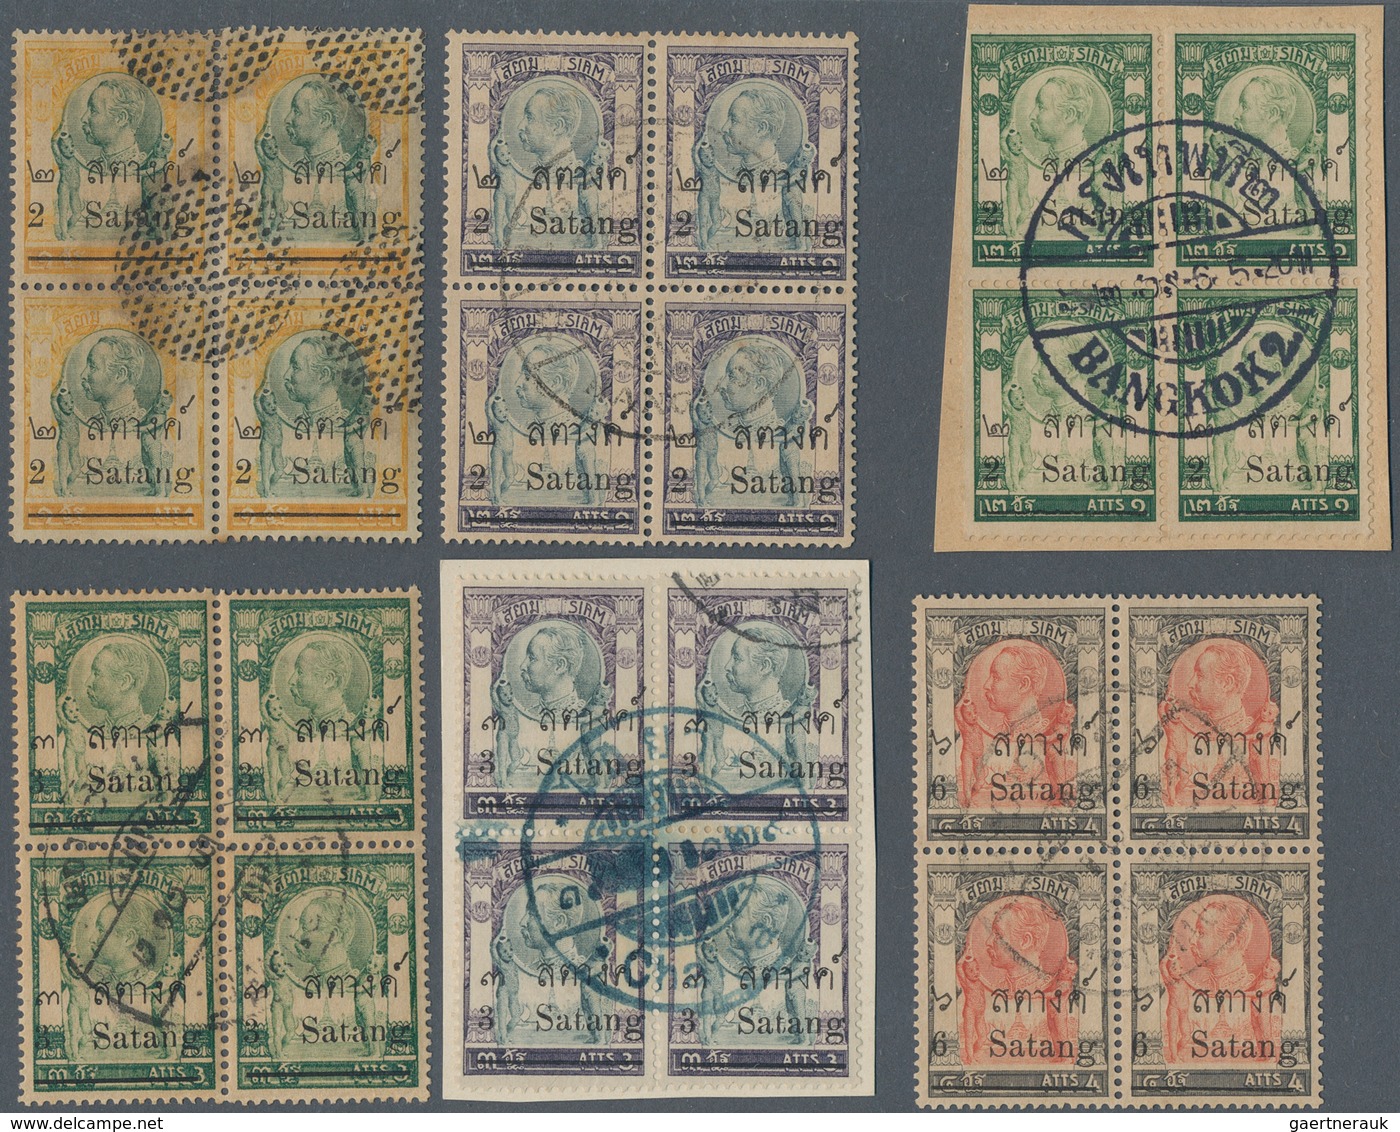 Thailand: 1909 - 1910, Postage Stamps With Two-line Value Imprints 2/1 A, 2/2 A, 2/2 A, 3/3 A, 3/3 A - Tailandia